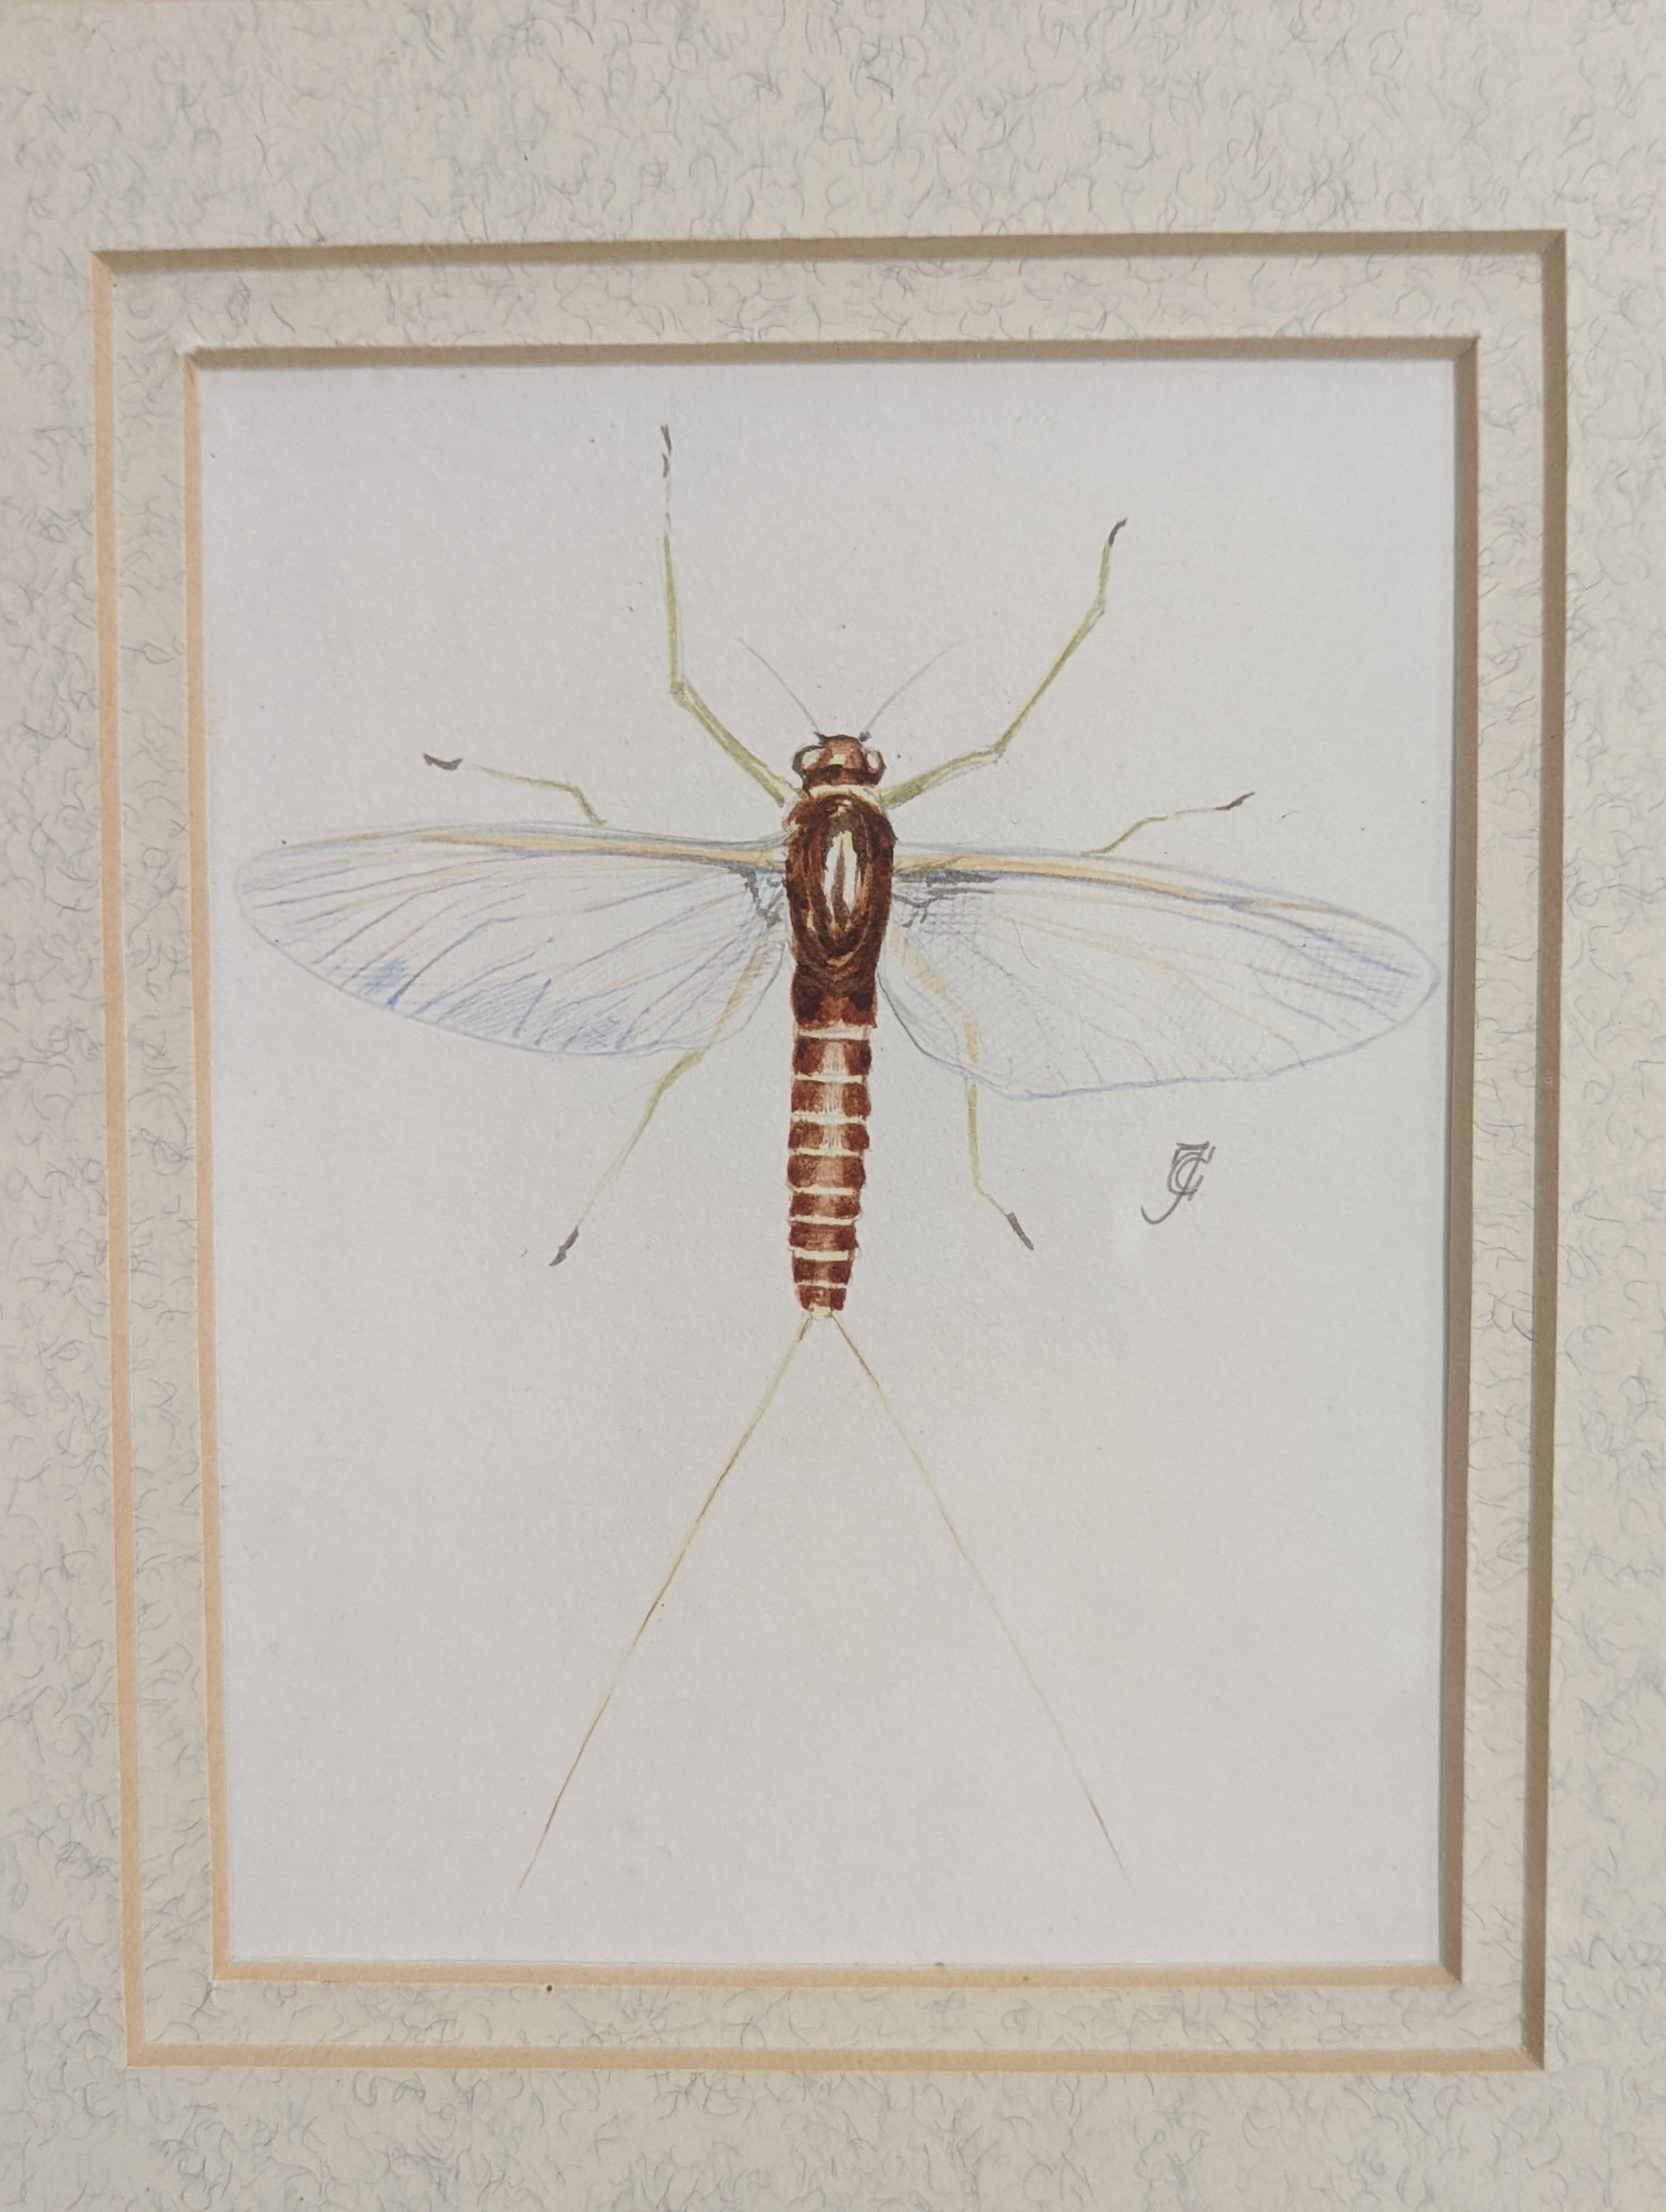 Charles Jardine, pencil and watercolour, Studies of a trout and mayflies, signed, largest 15 x 24cm, framed as one